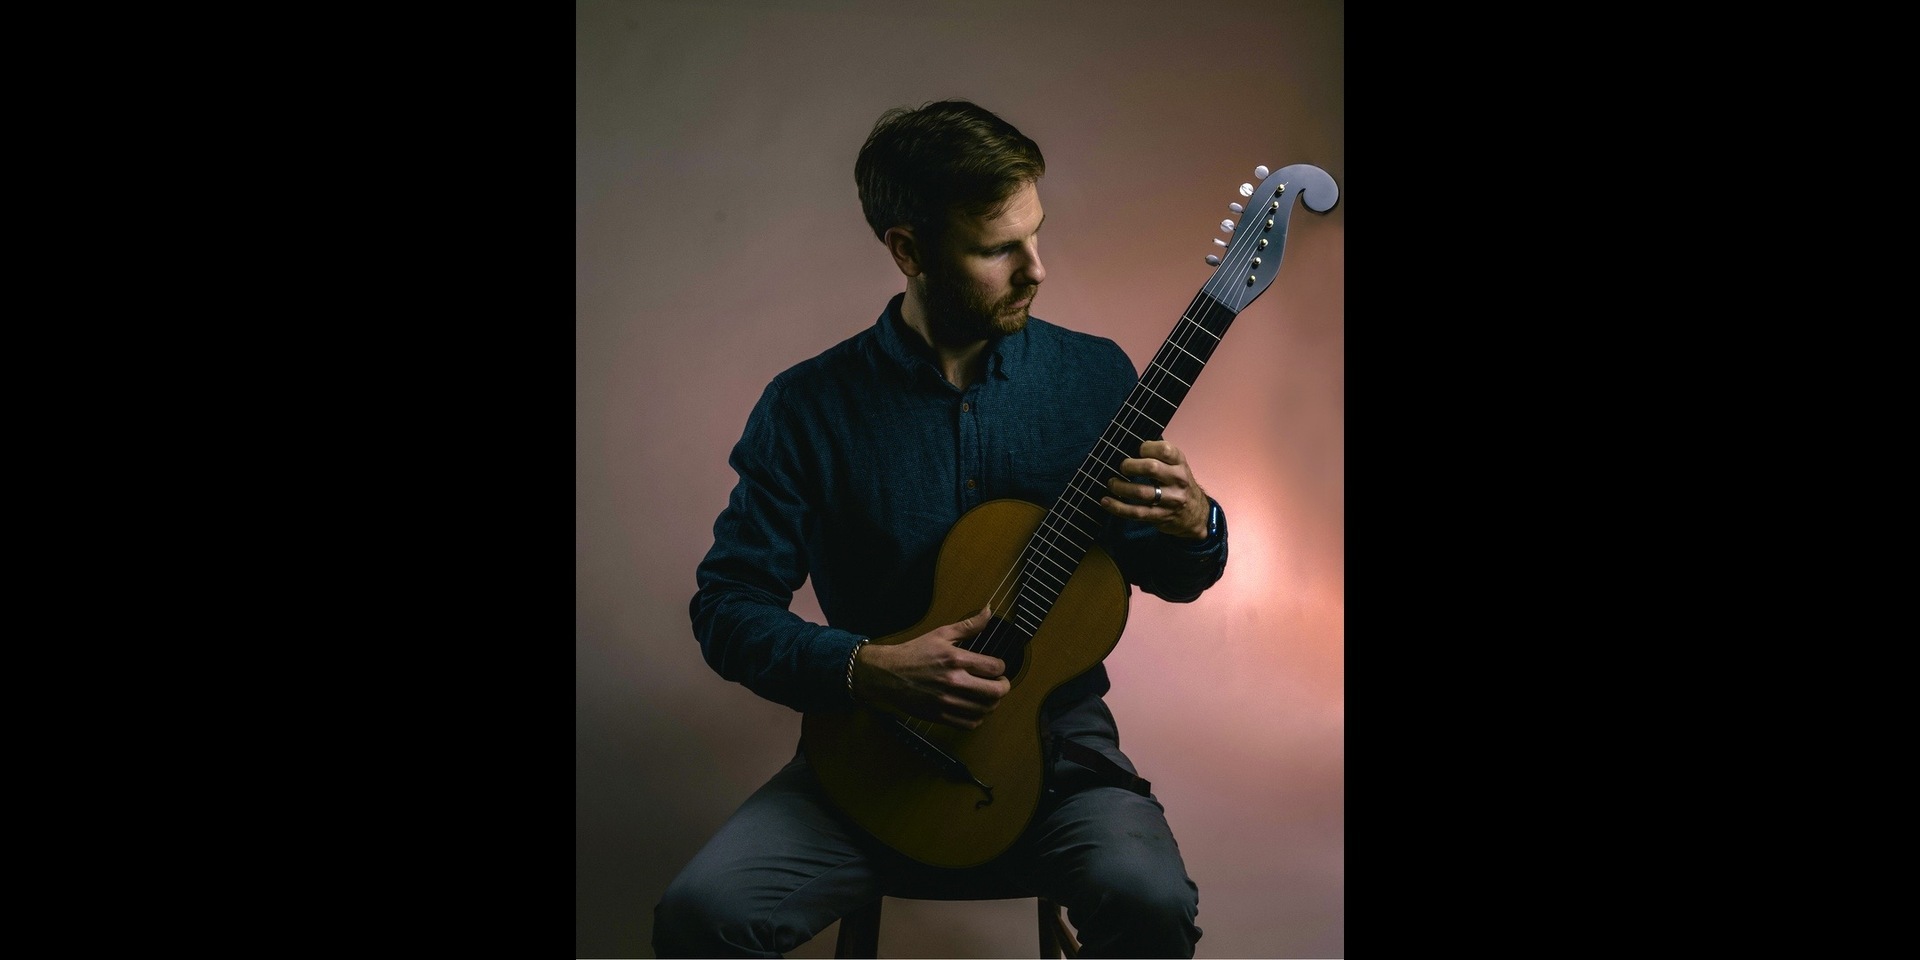 An Evening with the Classical Guitar - Peebles, Peebles, Scotland, United Kingdom